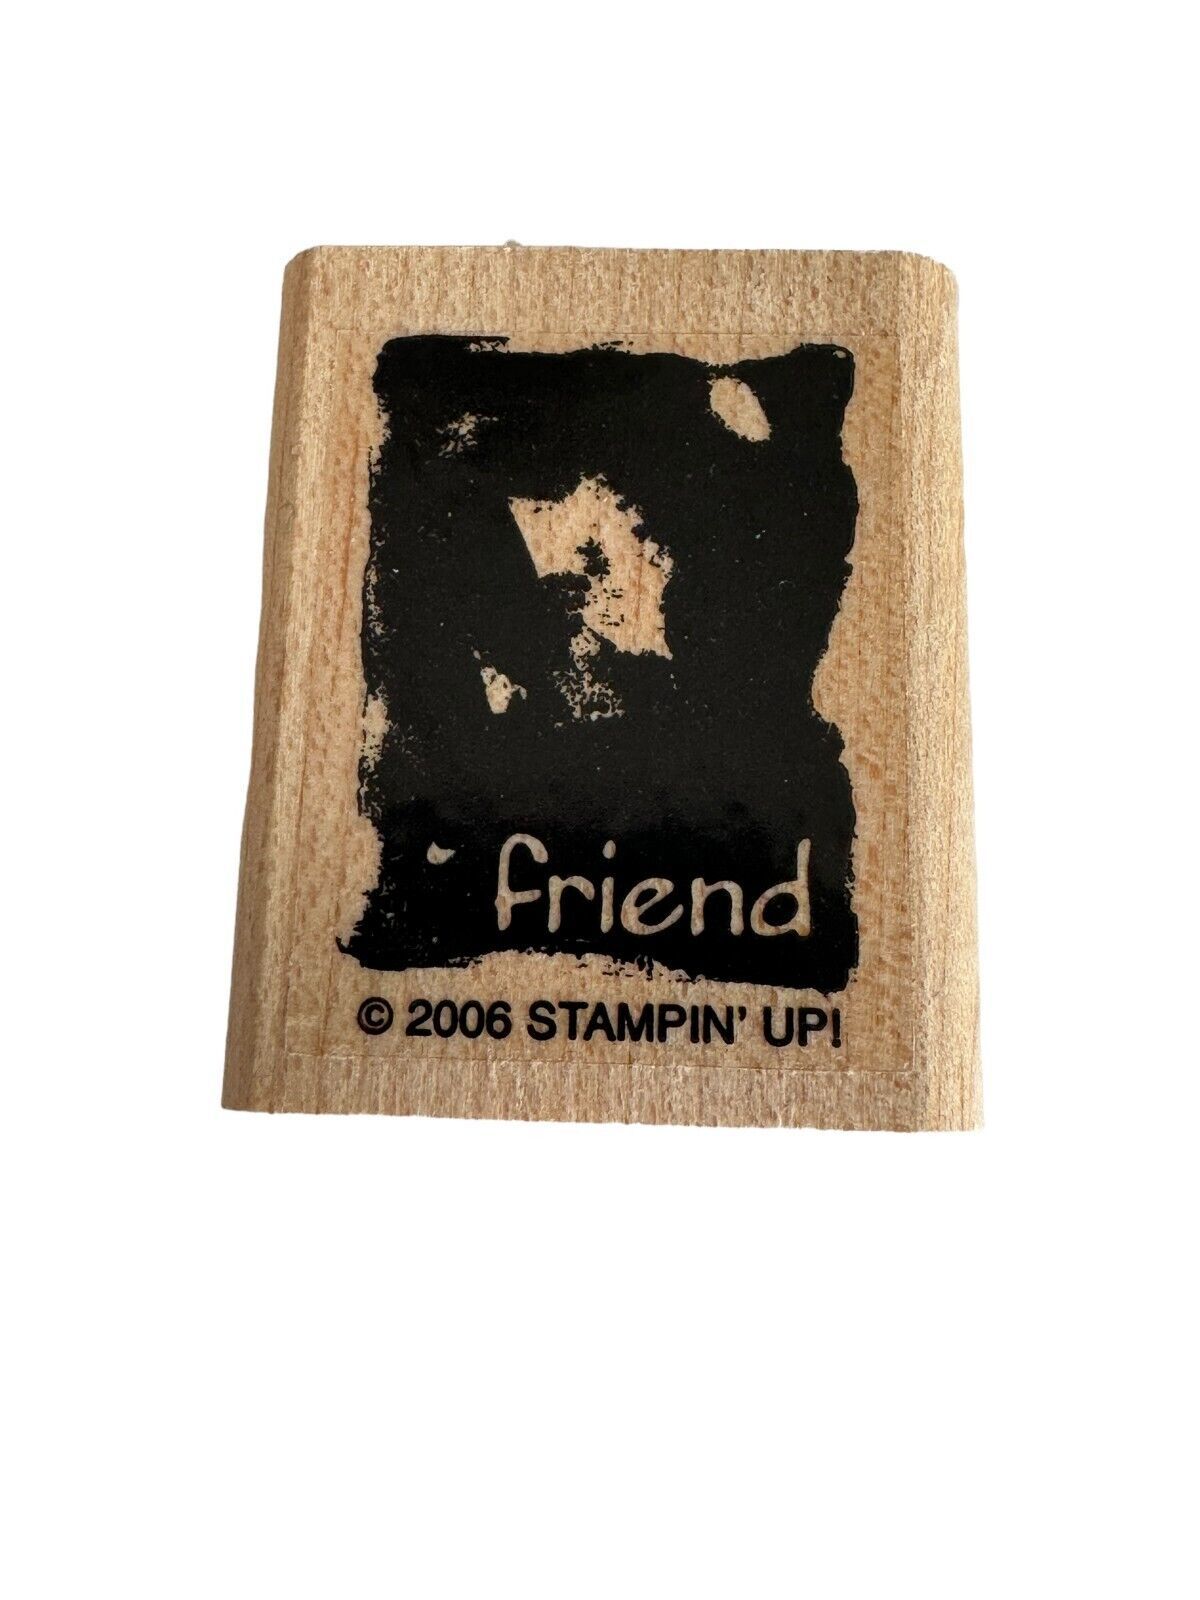 Primary image for Stampin' Up Rubber Stamp Friend Abstract Smudge Friendship Card Making Small